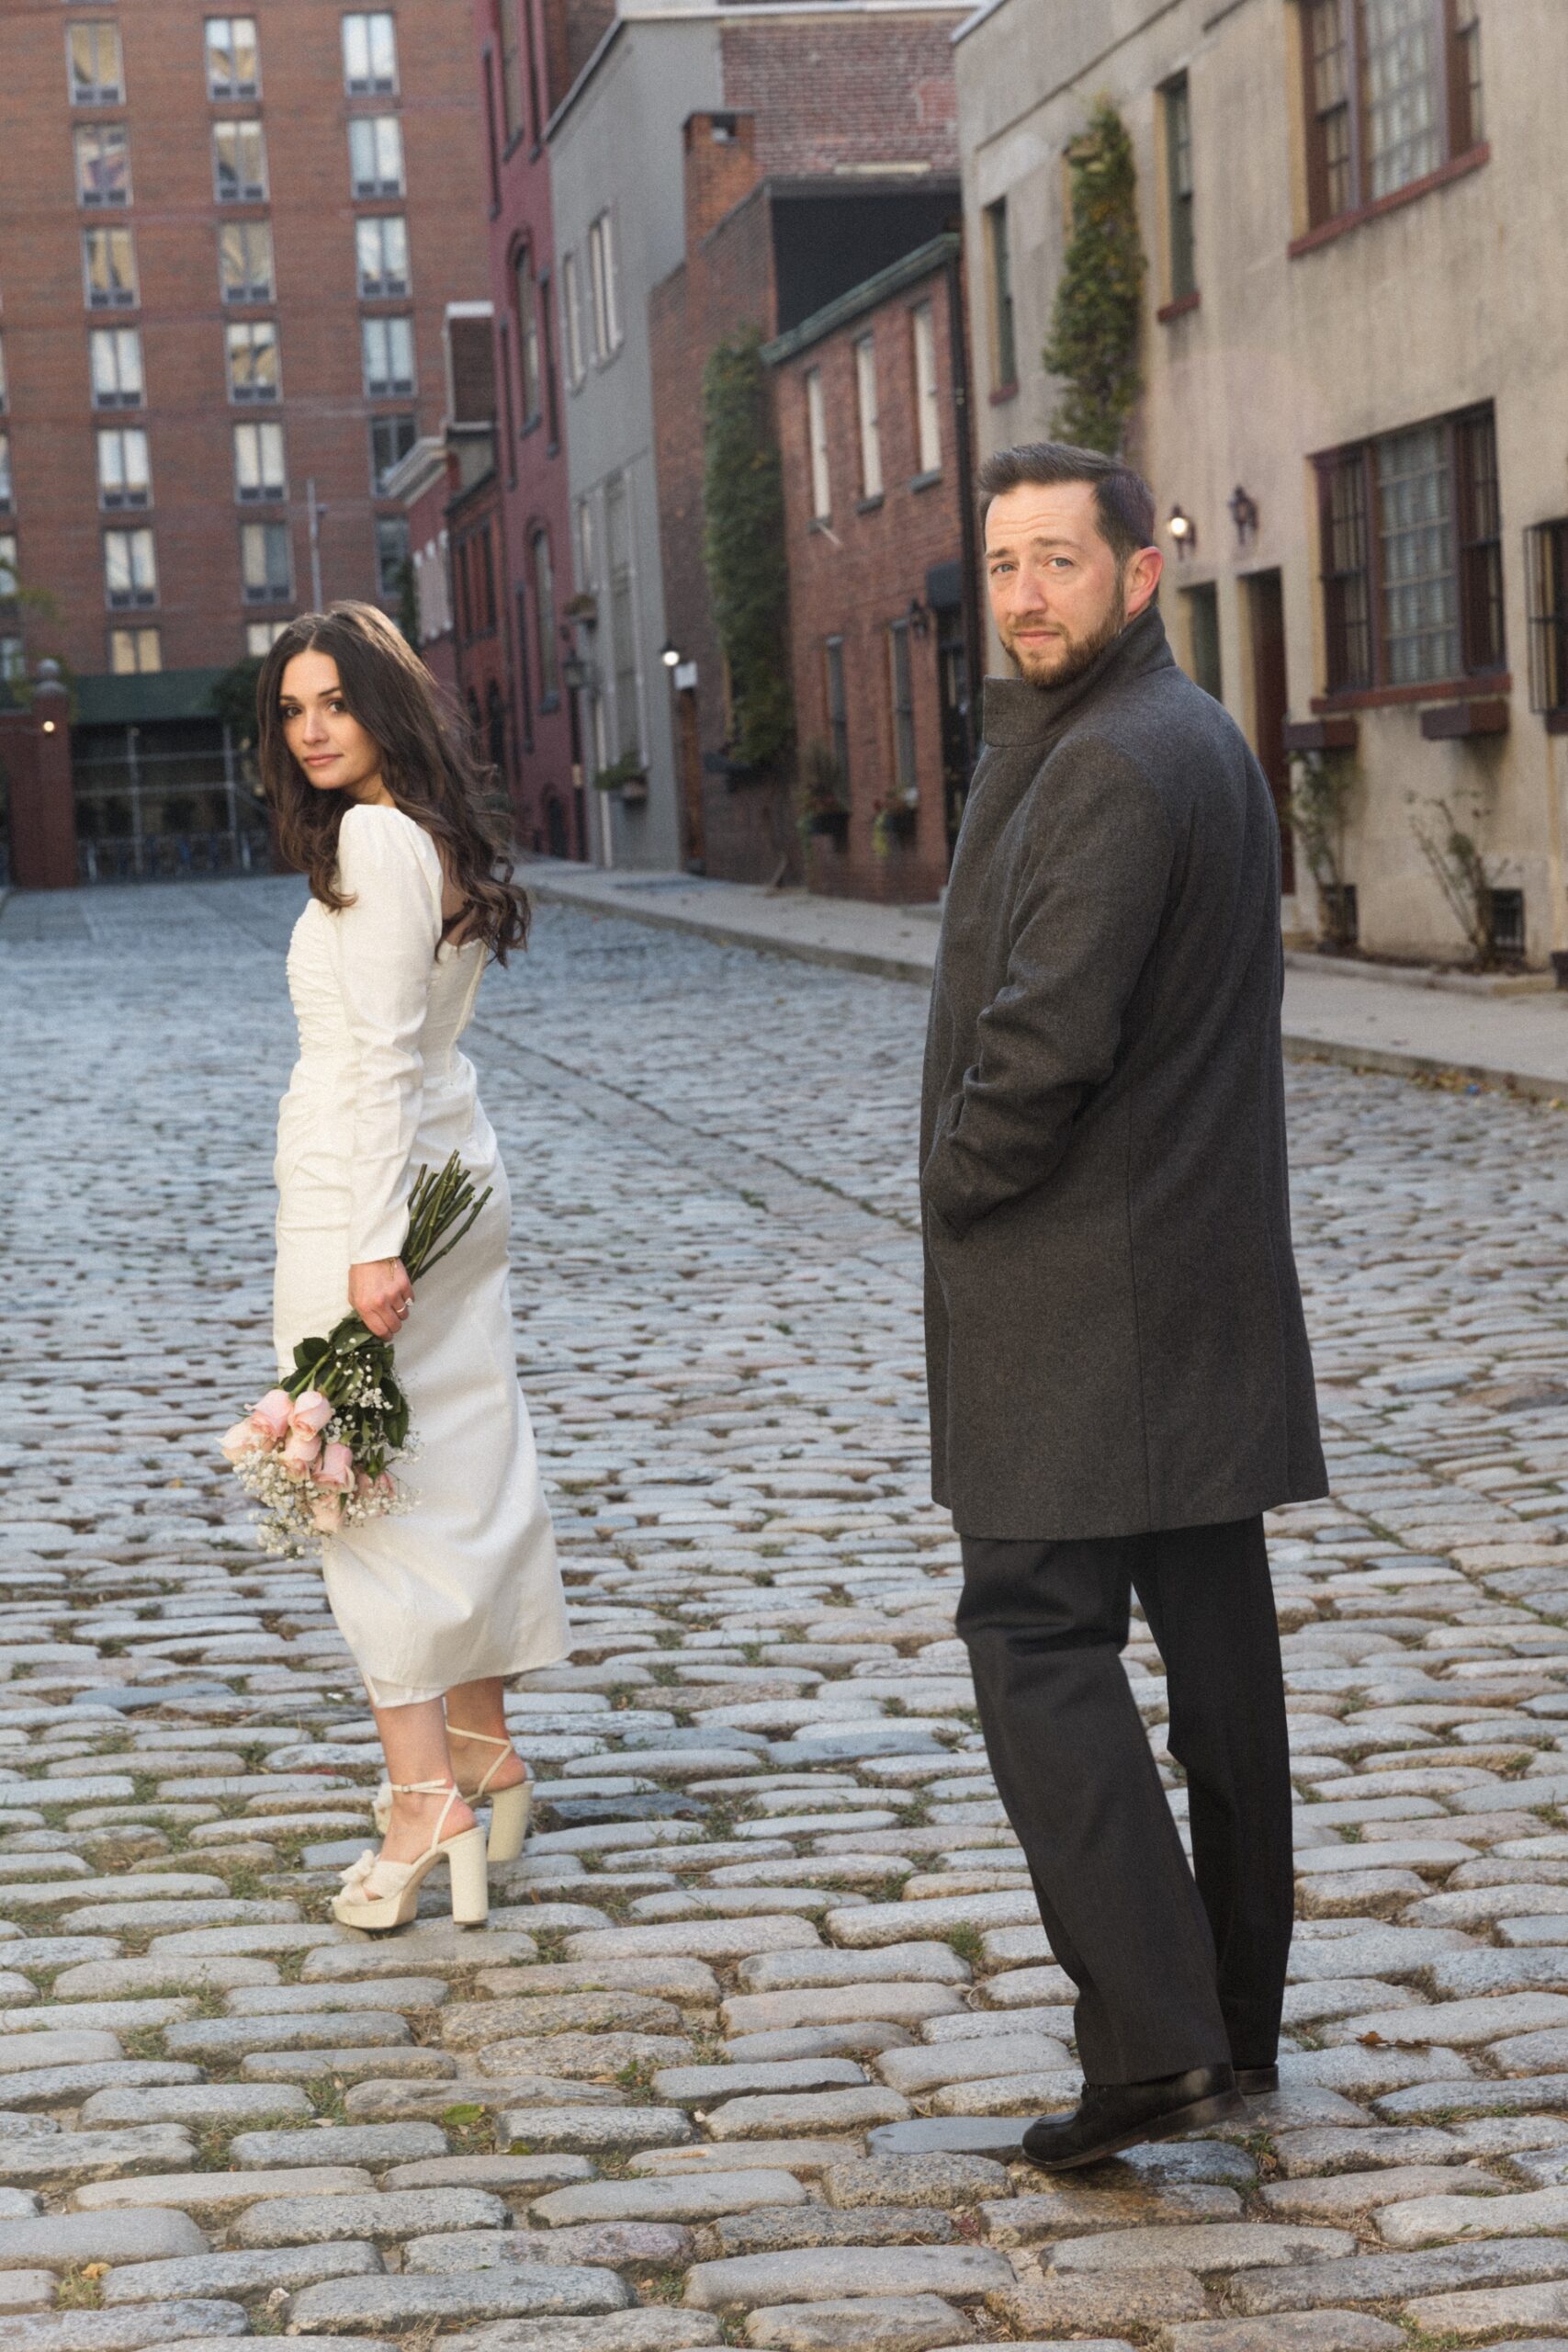 Kat and Vinny standing on a cobblestone street